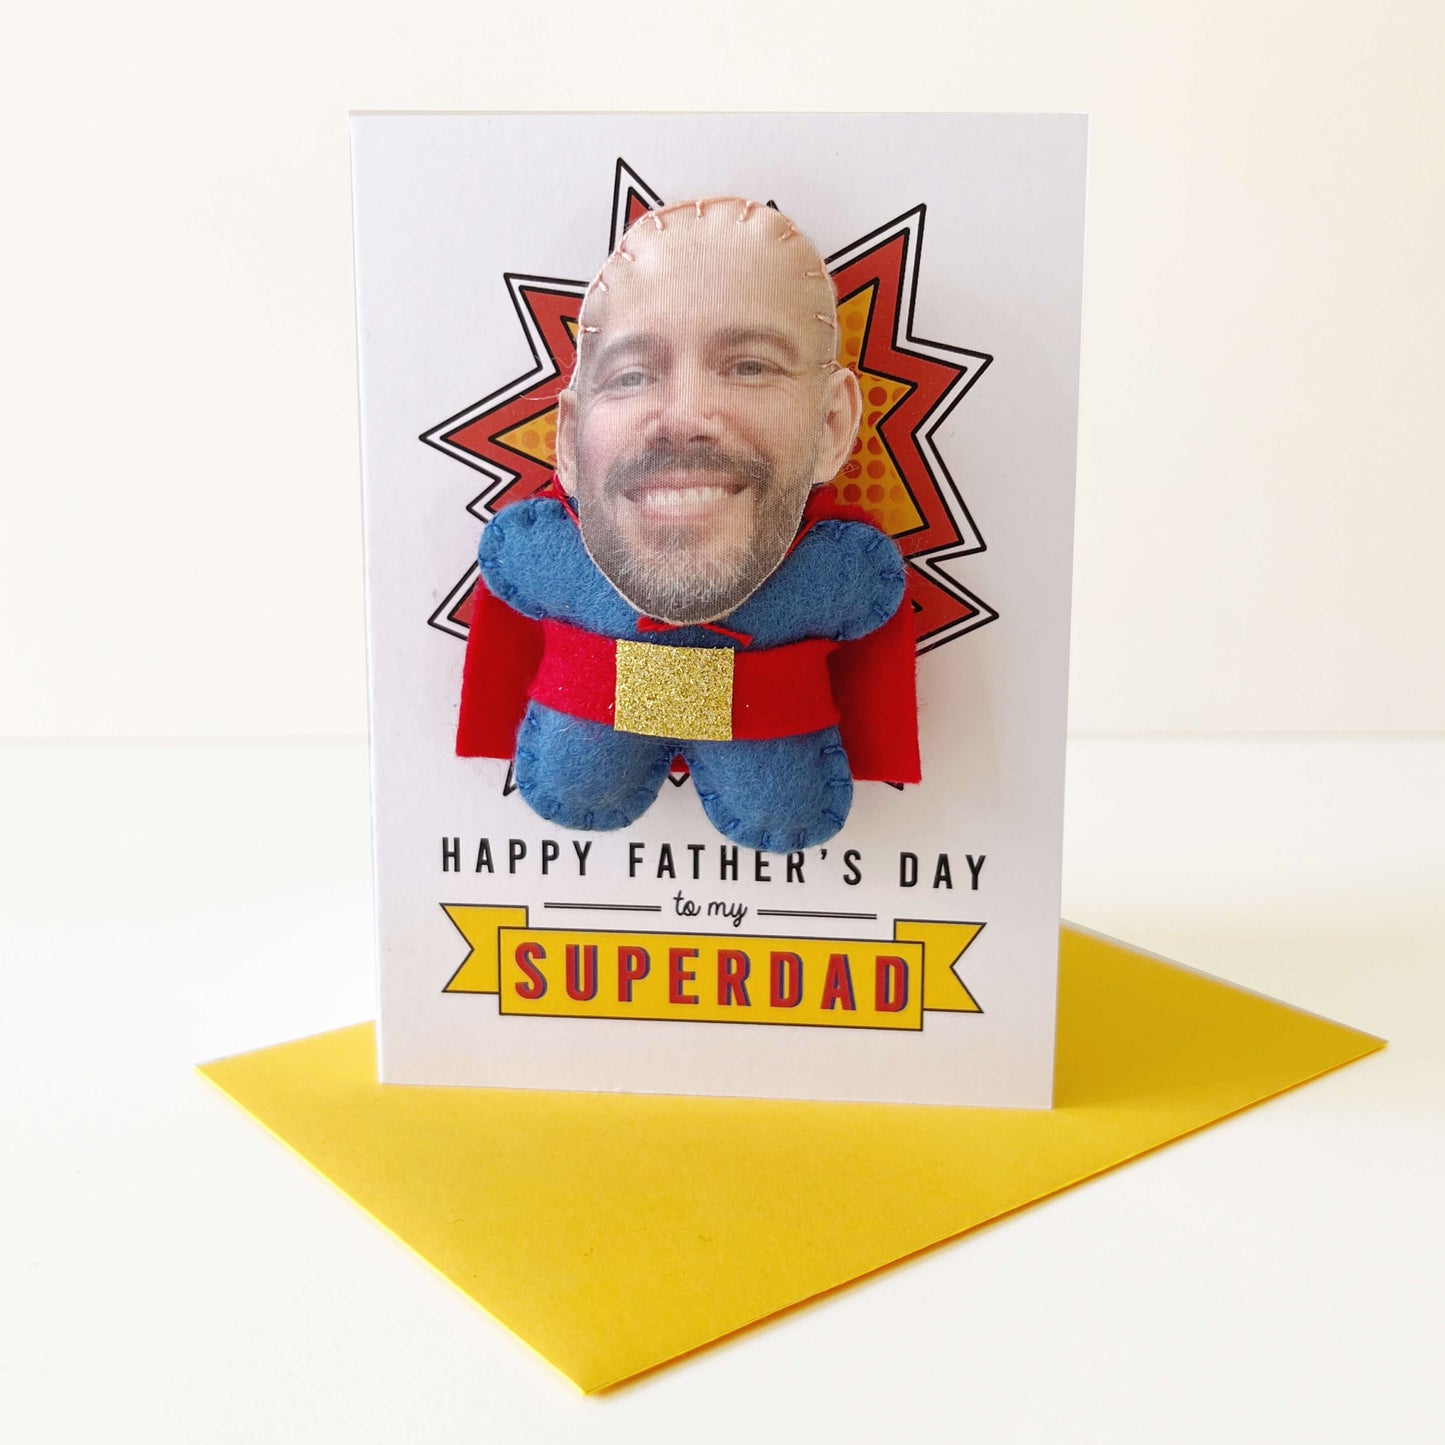 Superdad Father's Day Handmade Magnet Card